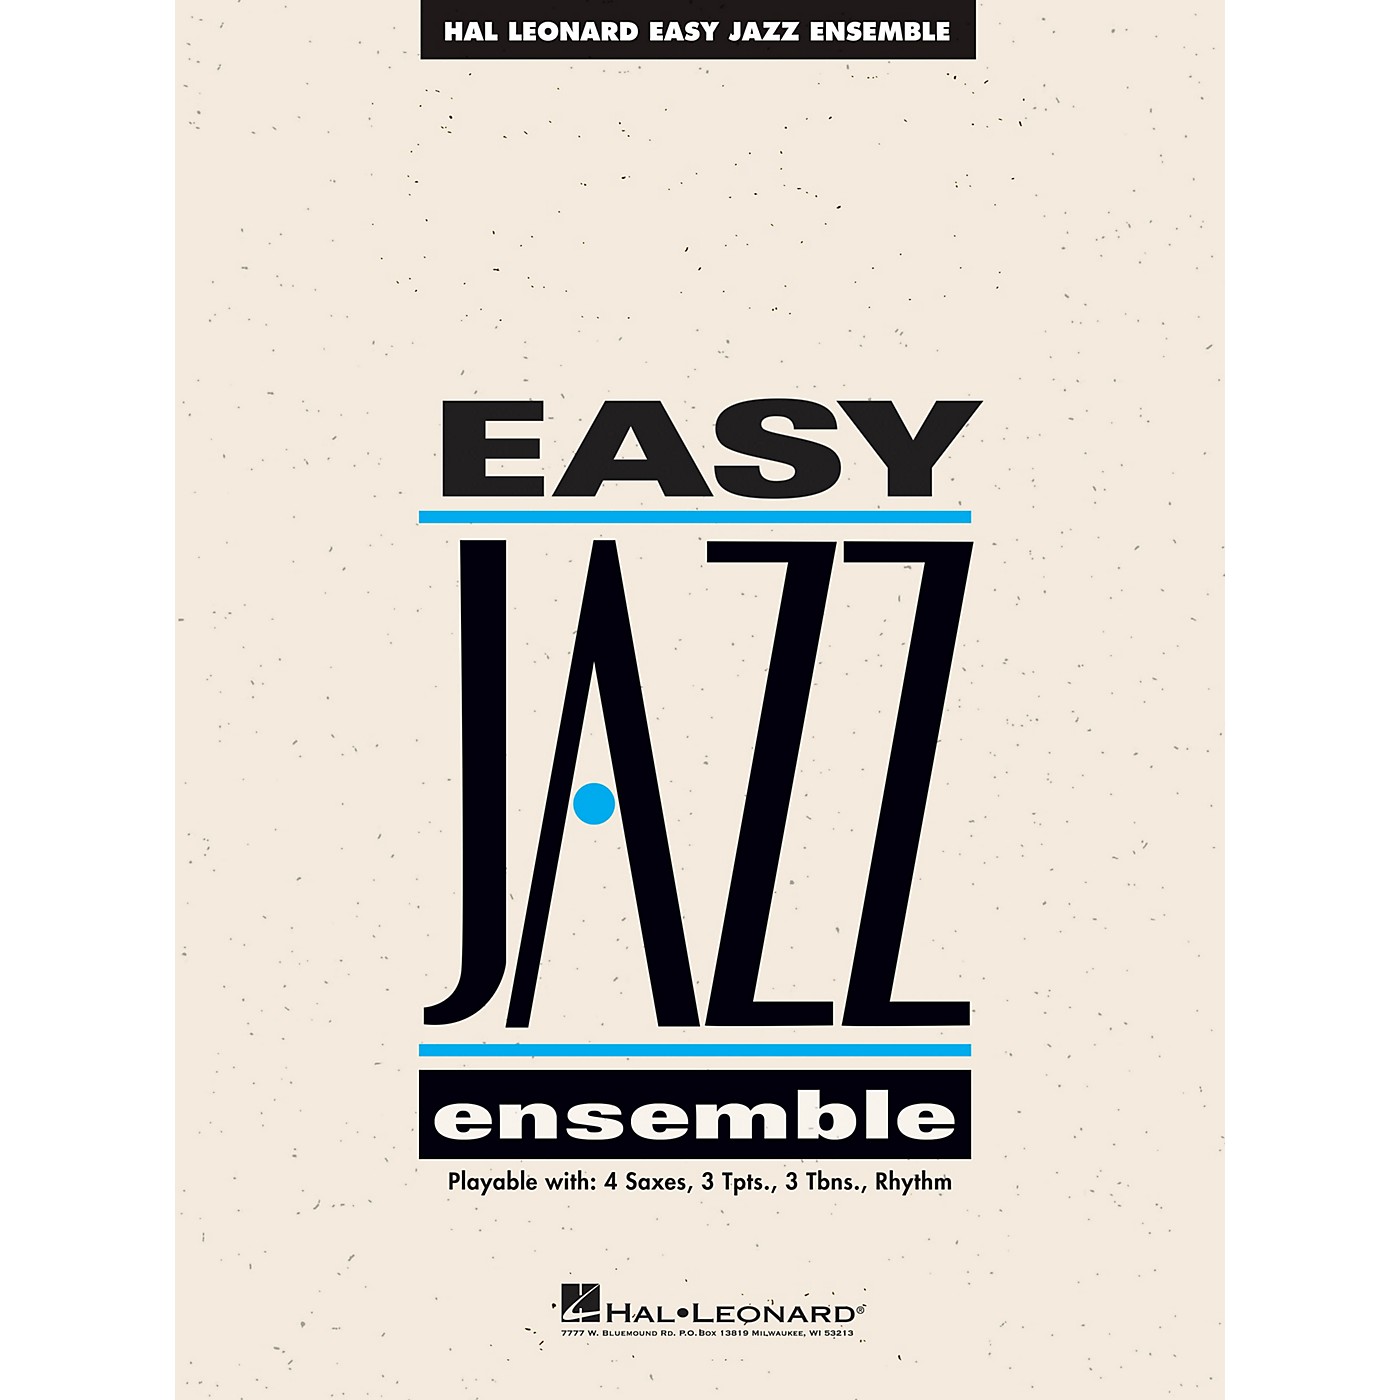 Hal Leonard The Best of Easy Jazz - Guitar (15 Selections from the Easy Jazz Ensemble Series) Jazz Band Level 2 thumbnail